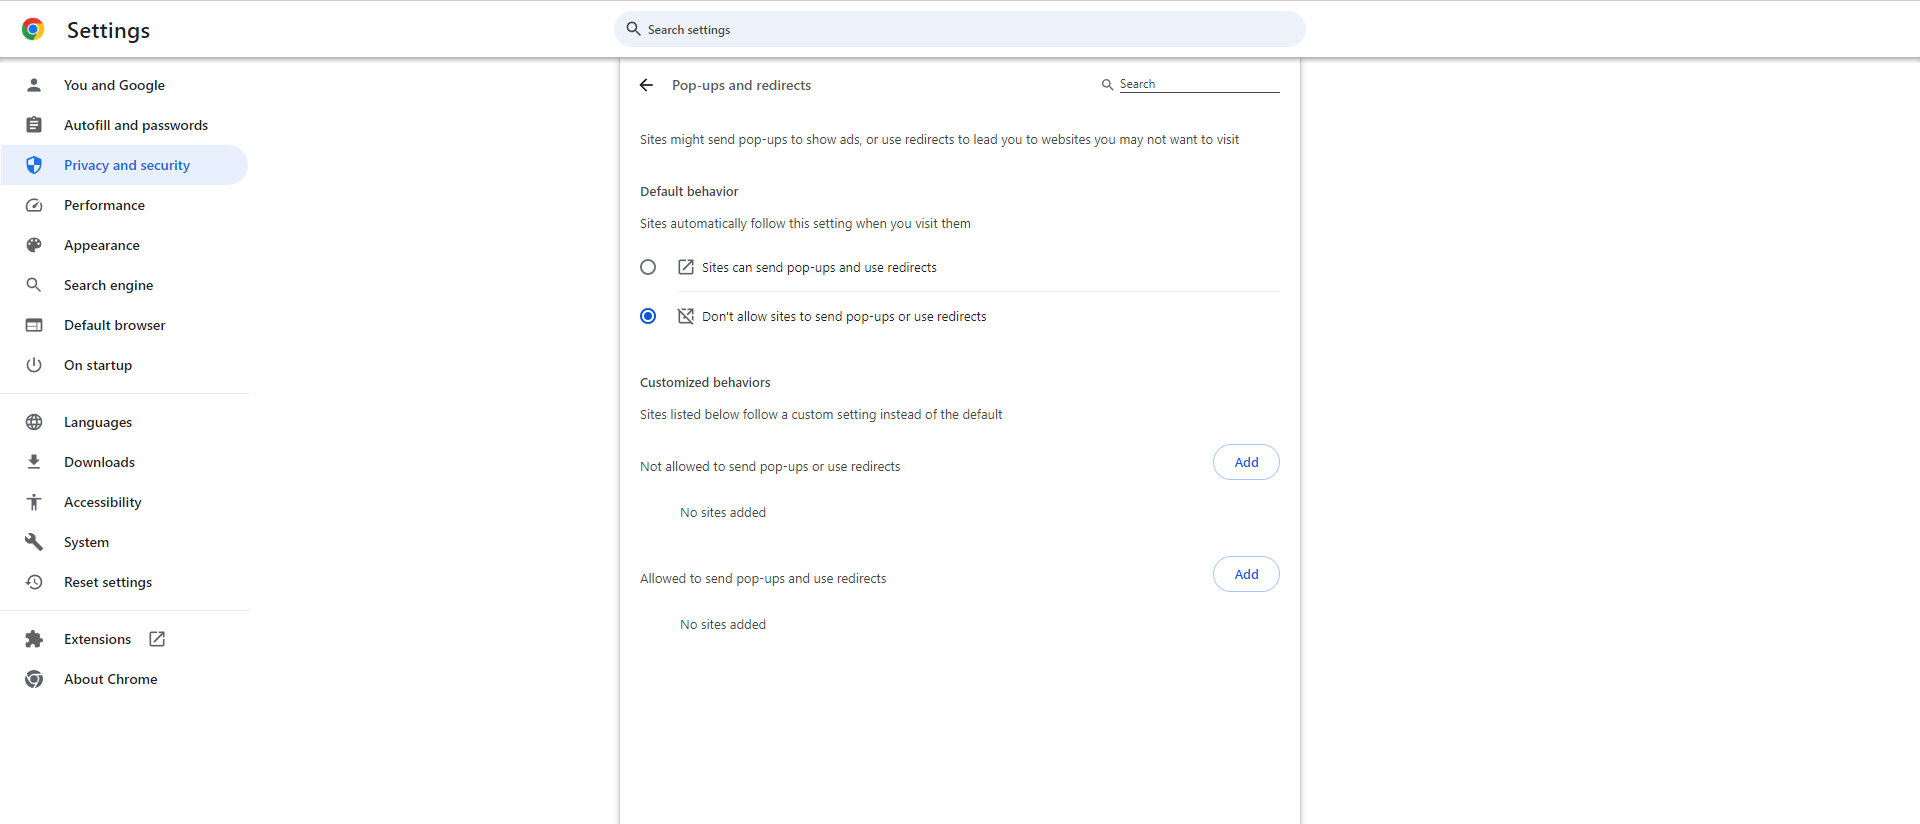 Screenshot showing Google Chrome settings for pop-ups and redirects